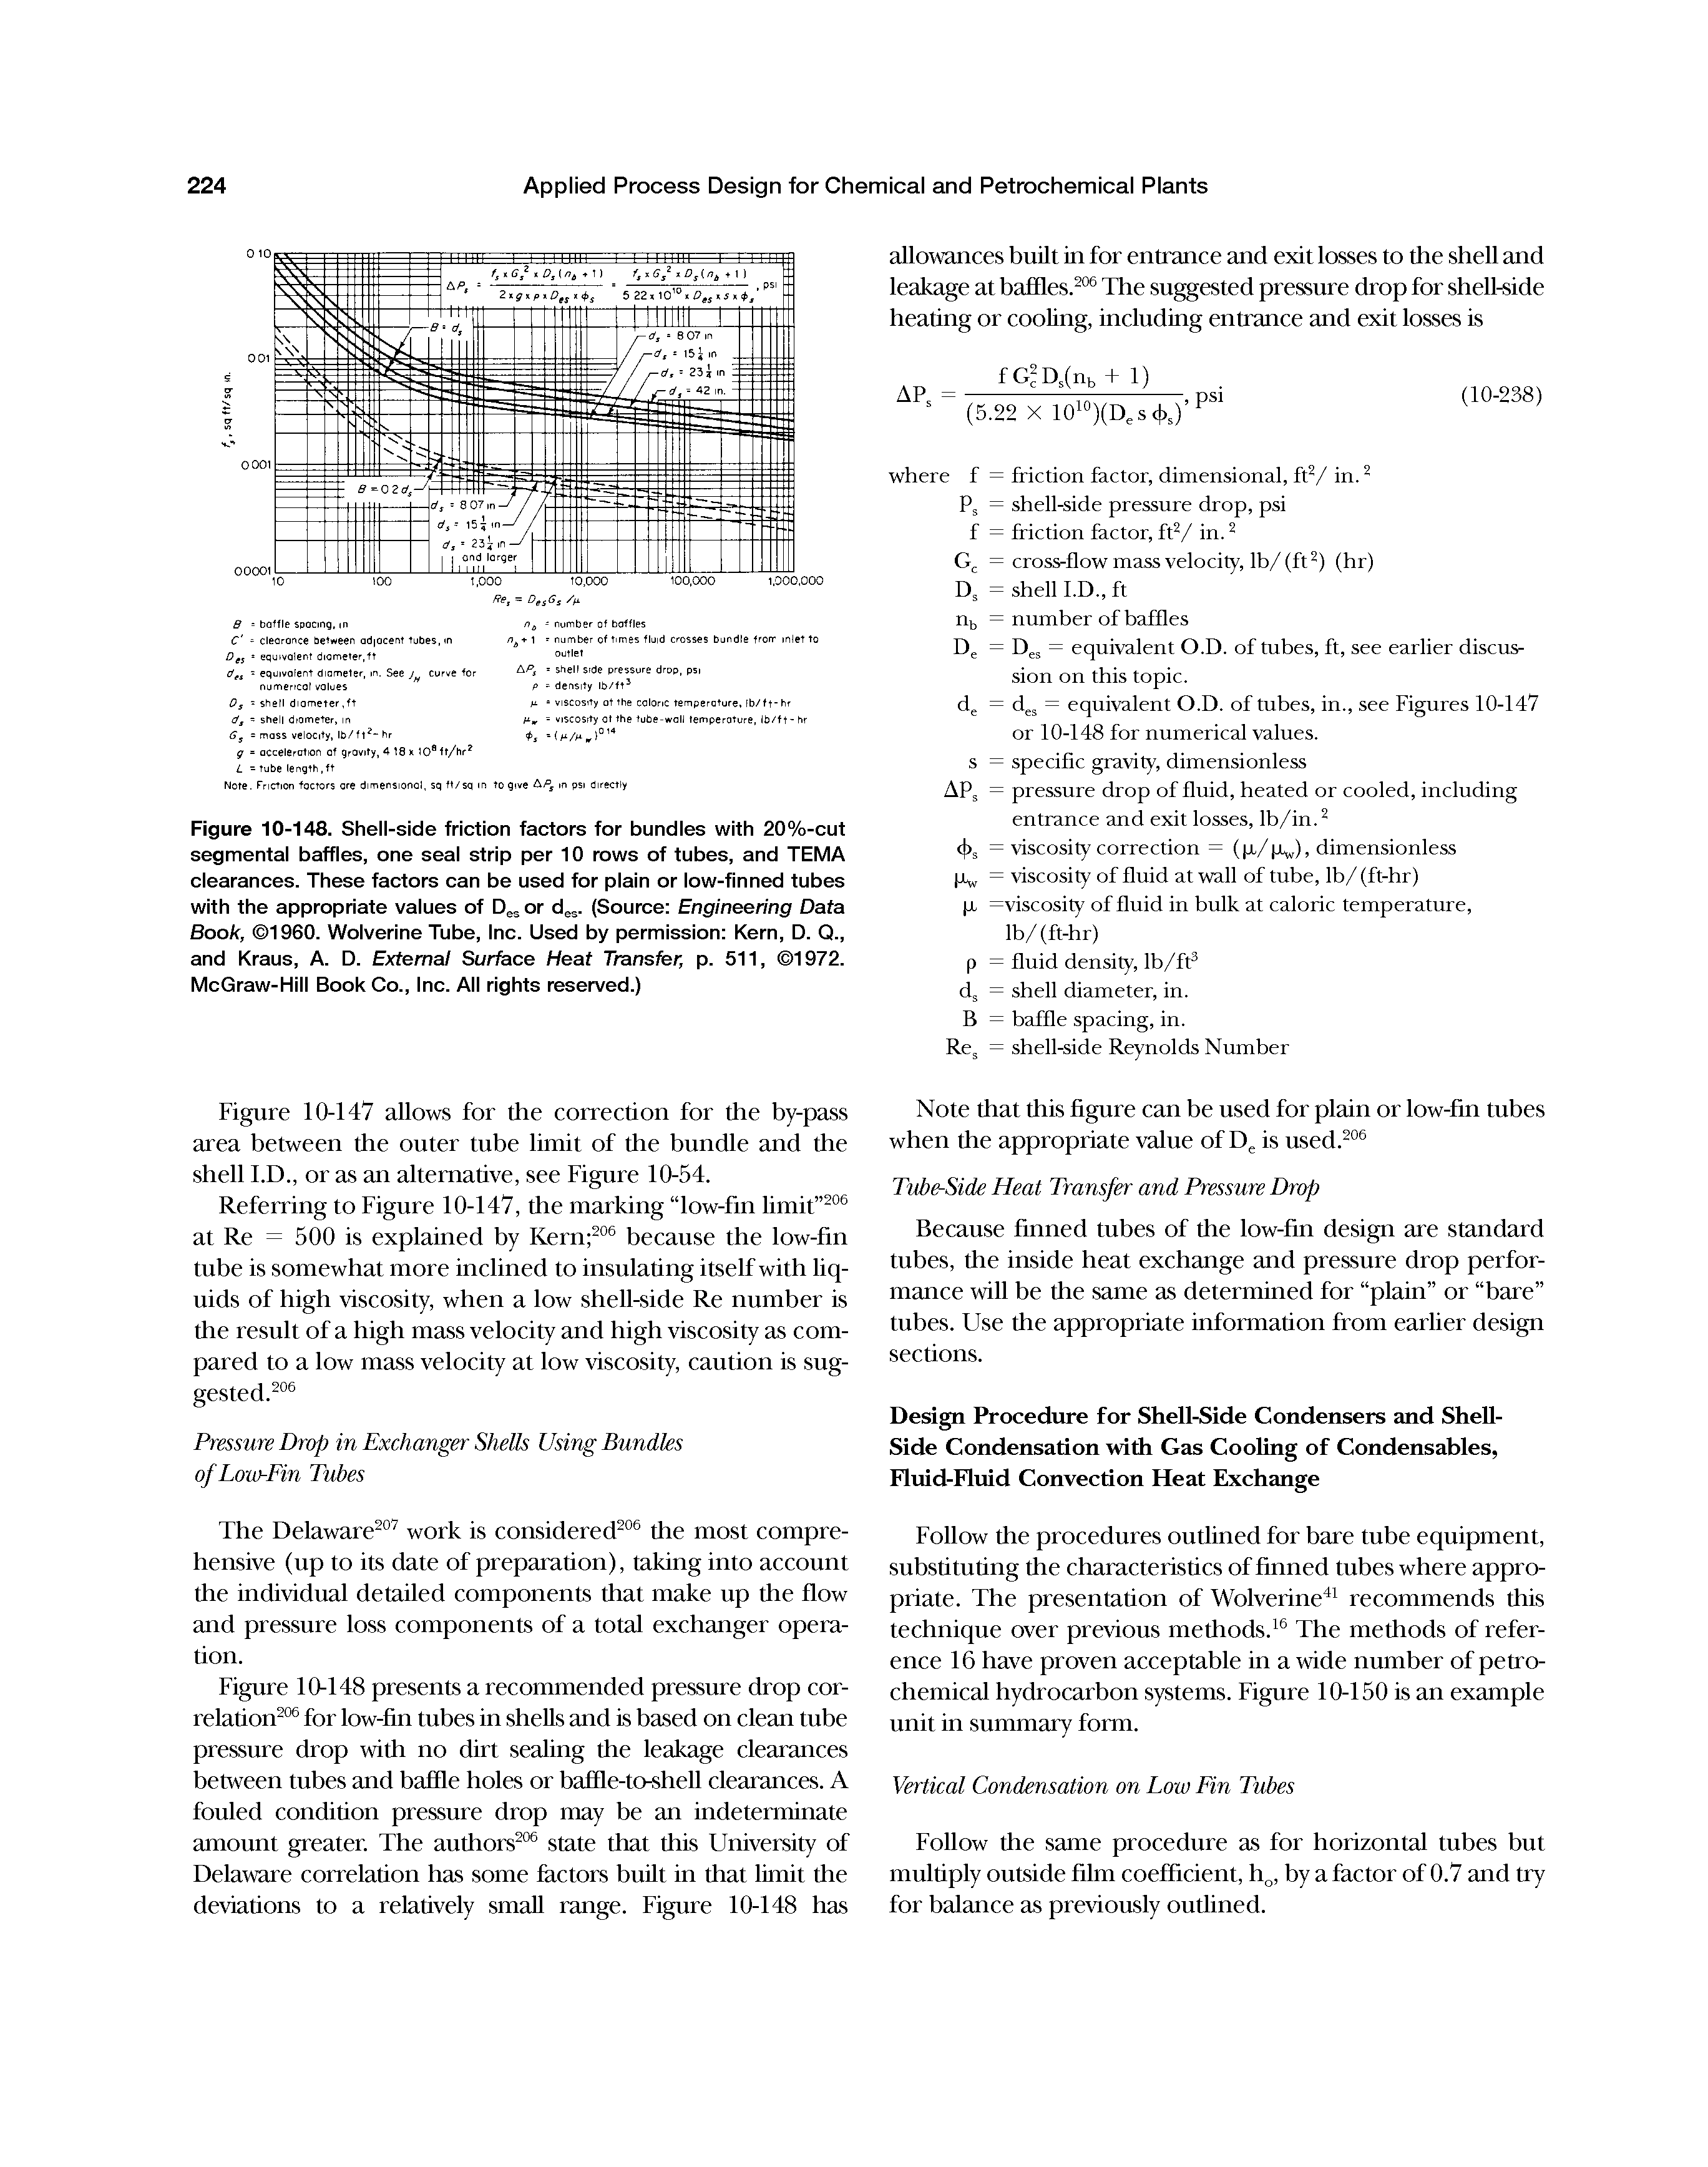 Figure 10-148. Shell-side friction factors for bundles with 20%-cut segmental baffles, one seal strip per 10 rows of tubes, and TEMA clearances. These factors can be used for plain or low-finned tubes with the appropriate values of D s or d s. (Source Engineering Data Book, 1960. Wolverine Tube, Inc. Used by permission Kern, D. Q., and Kraus, A. D. External Surface Heat Transfer, p. 511, 1972. McGraw-Hill Book Co., Inc. All rights reserved.)...